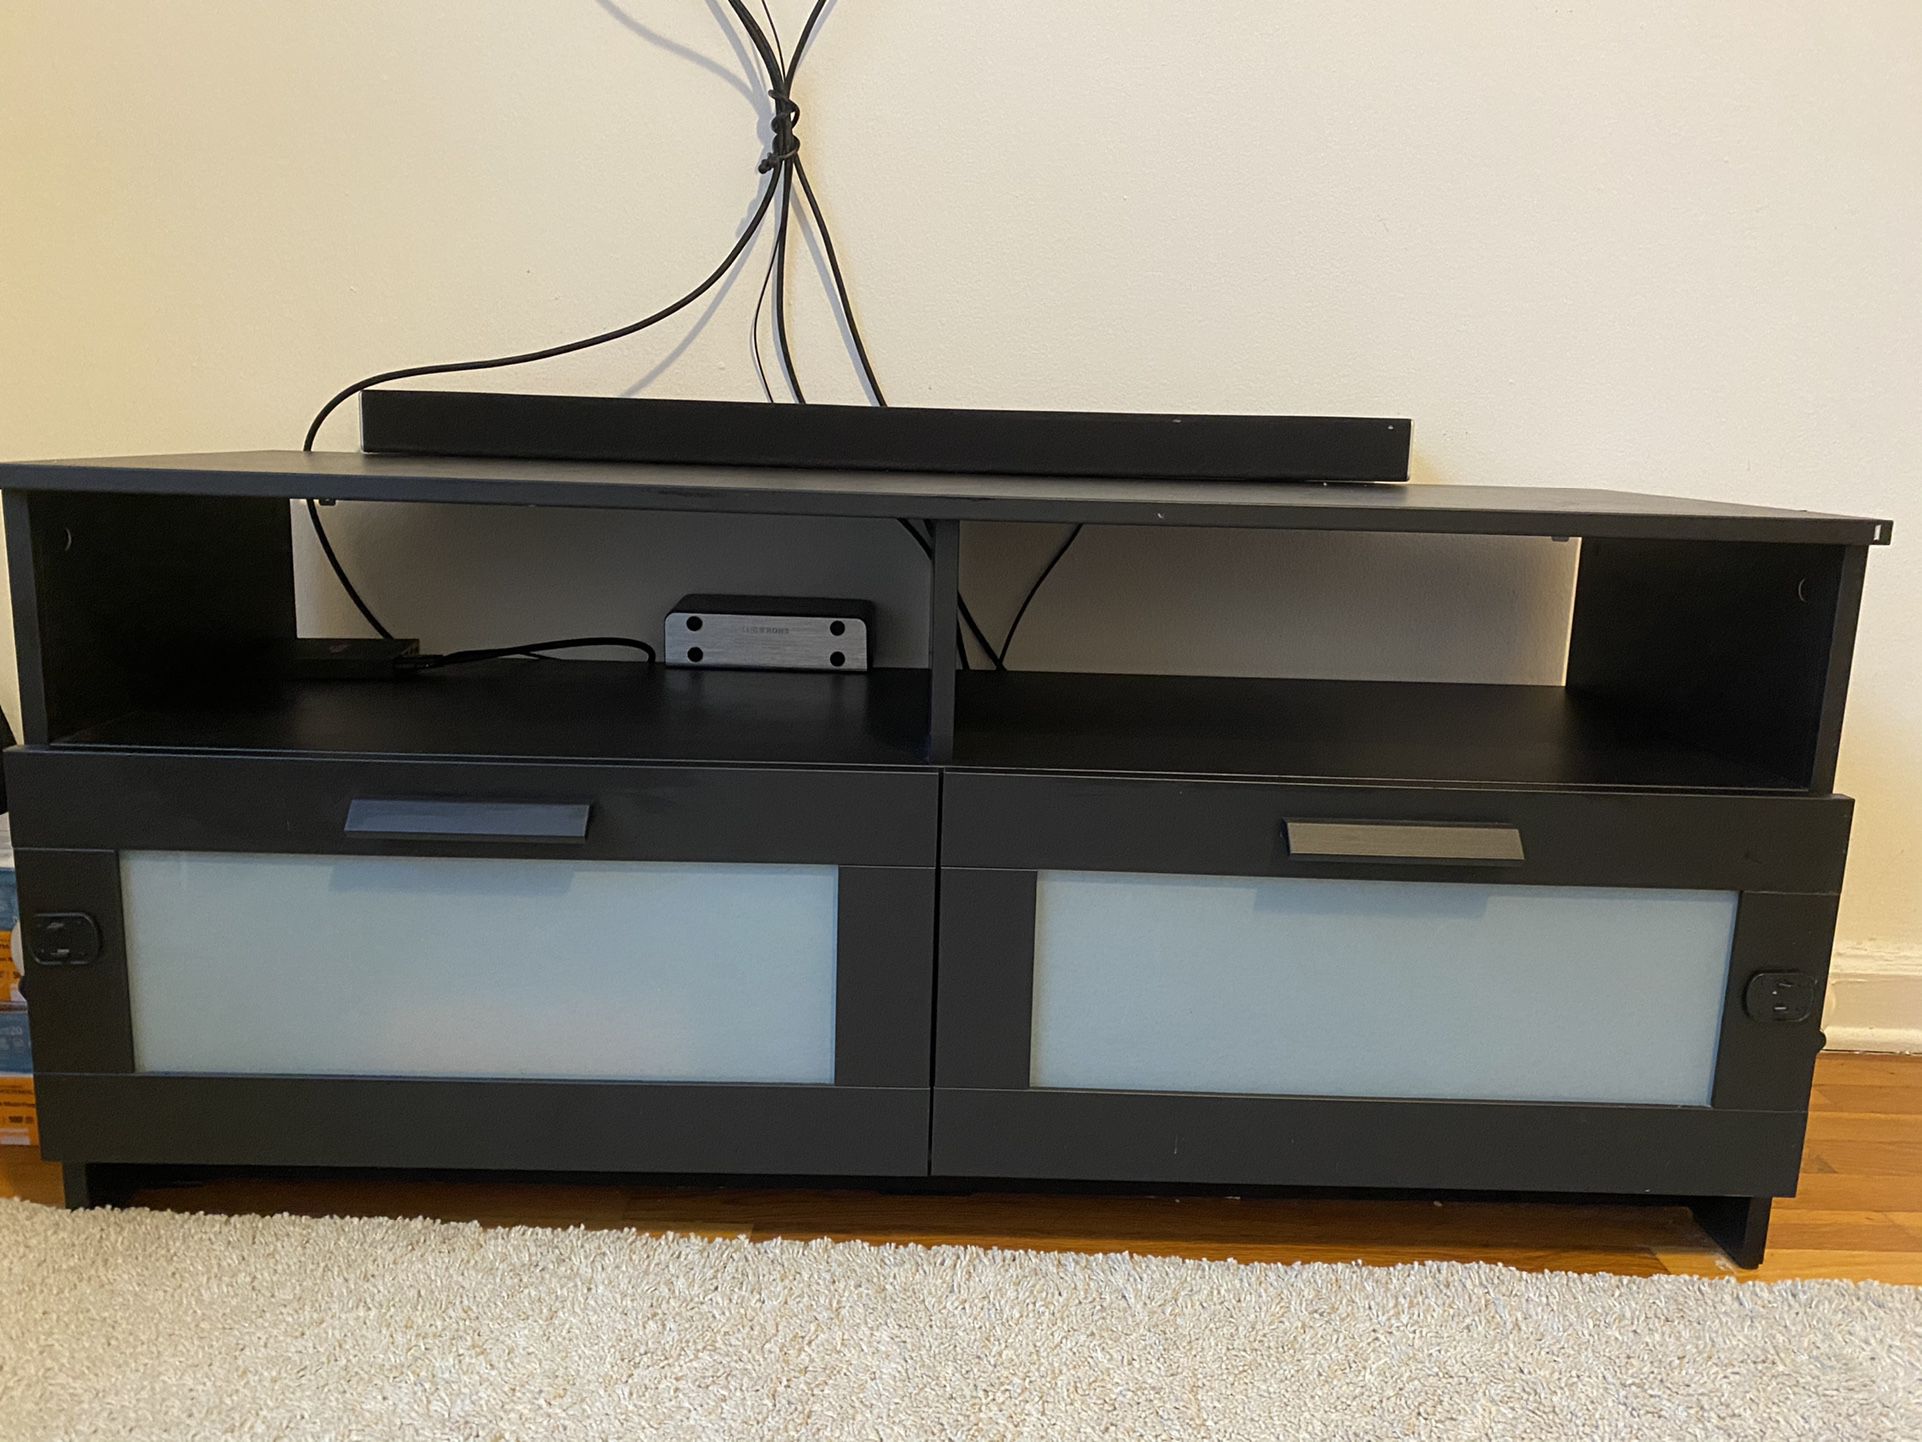 IKEA TV Unit in a very good condition